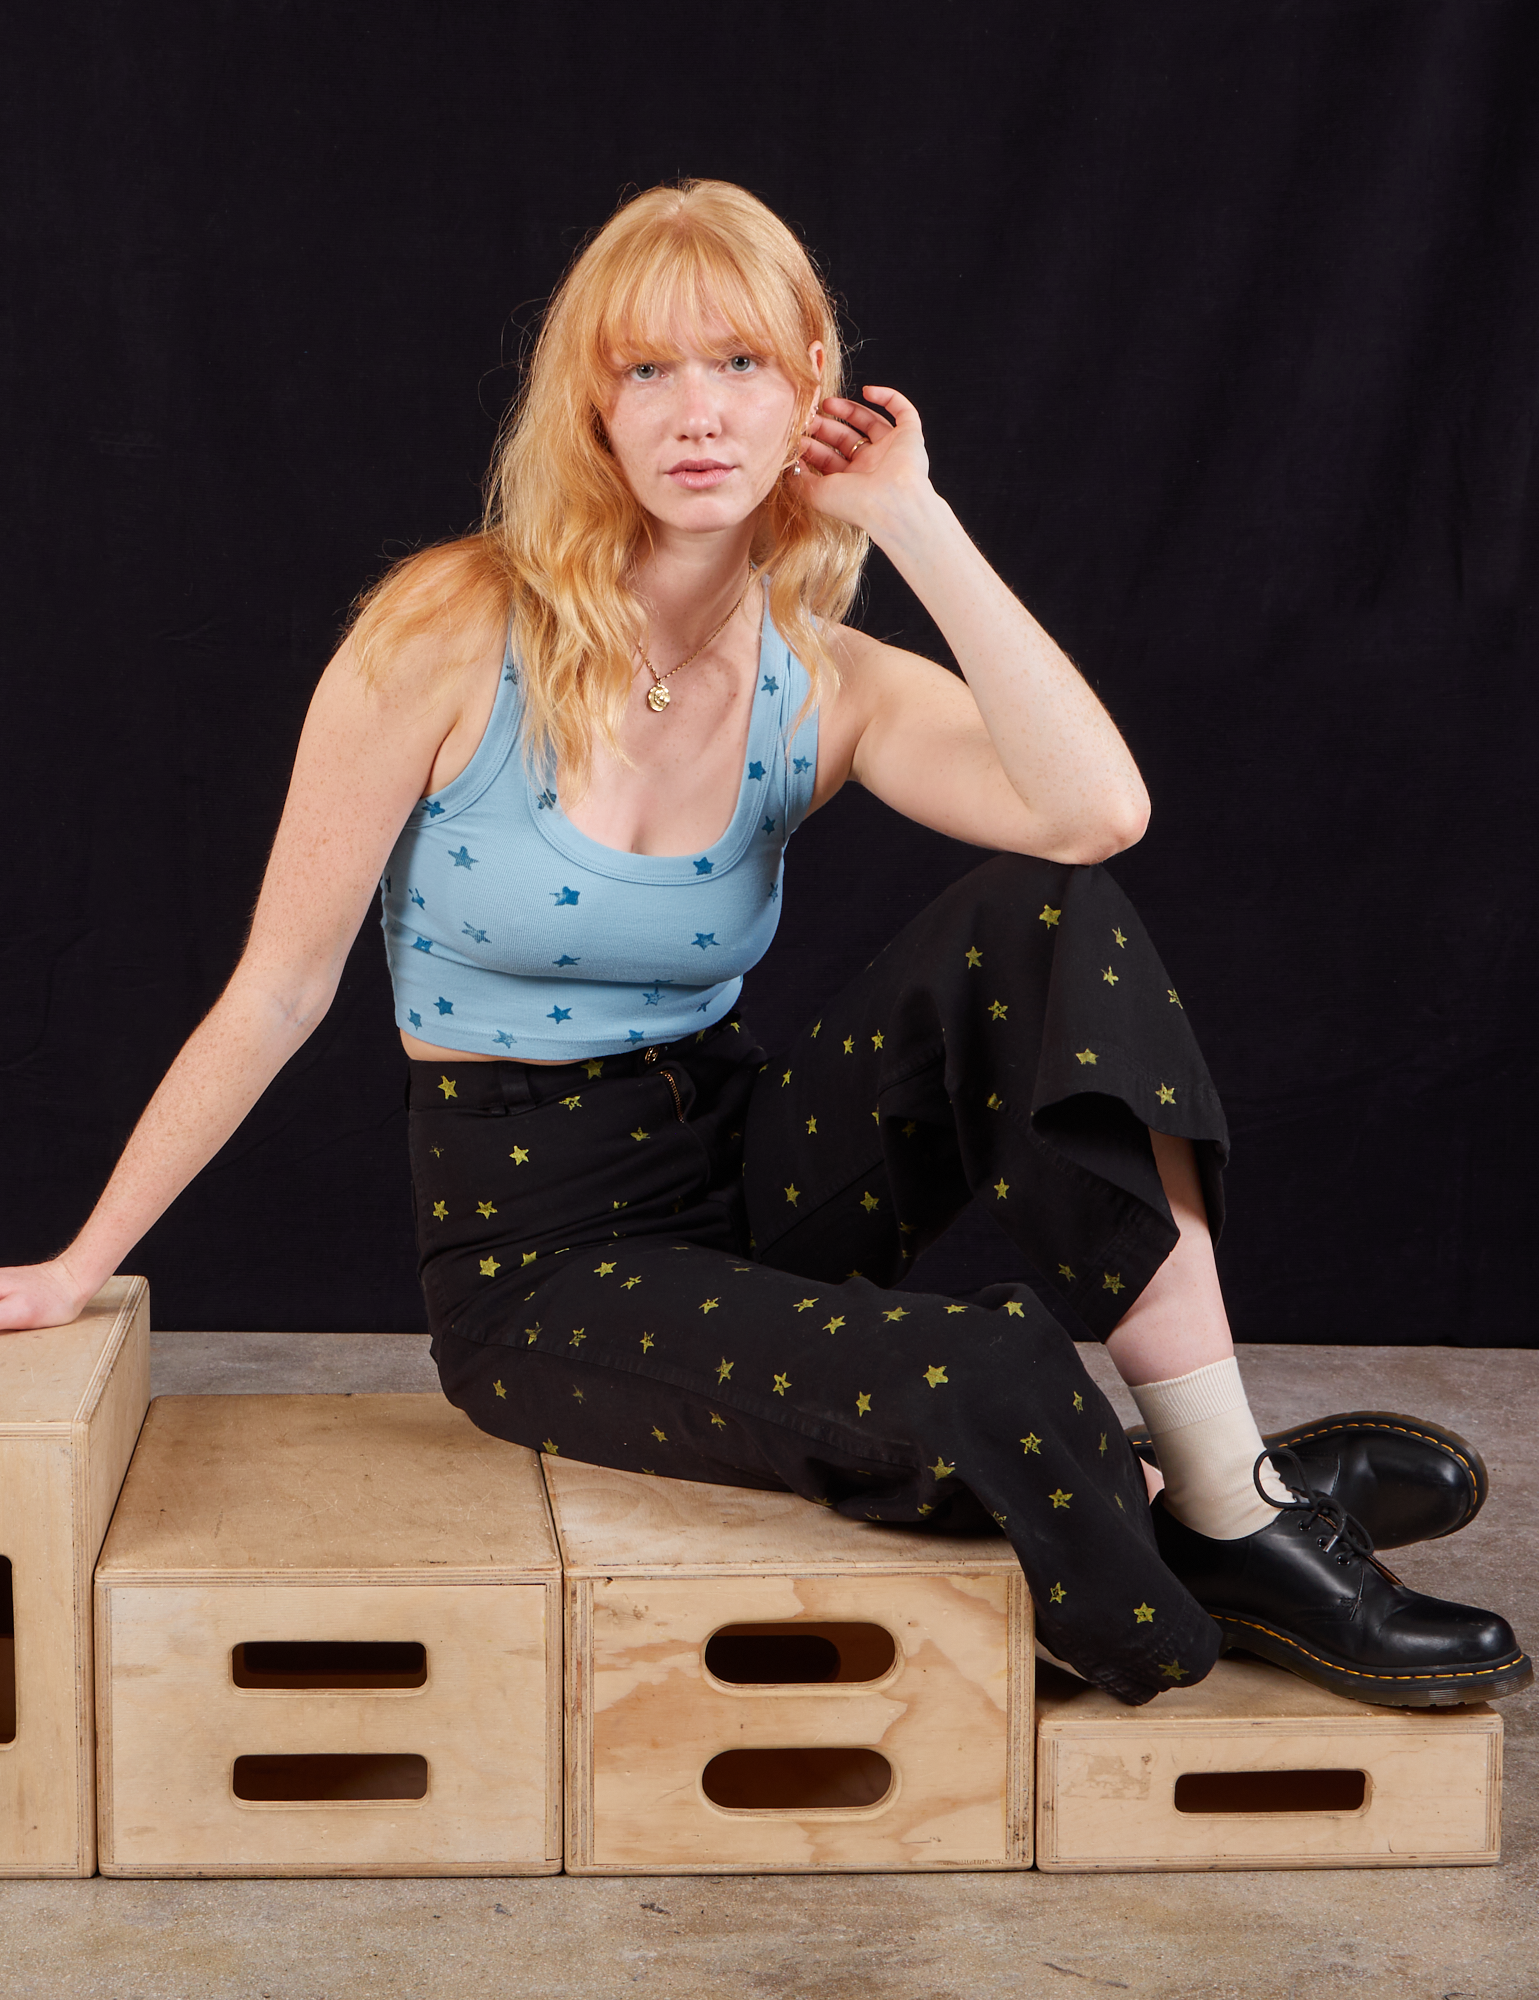 Margaret is wearing Star Bell Bottoms in Black and Star Cropped Tank in blue